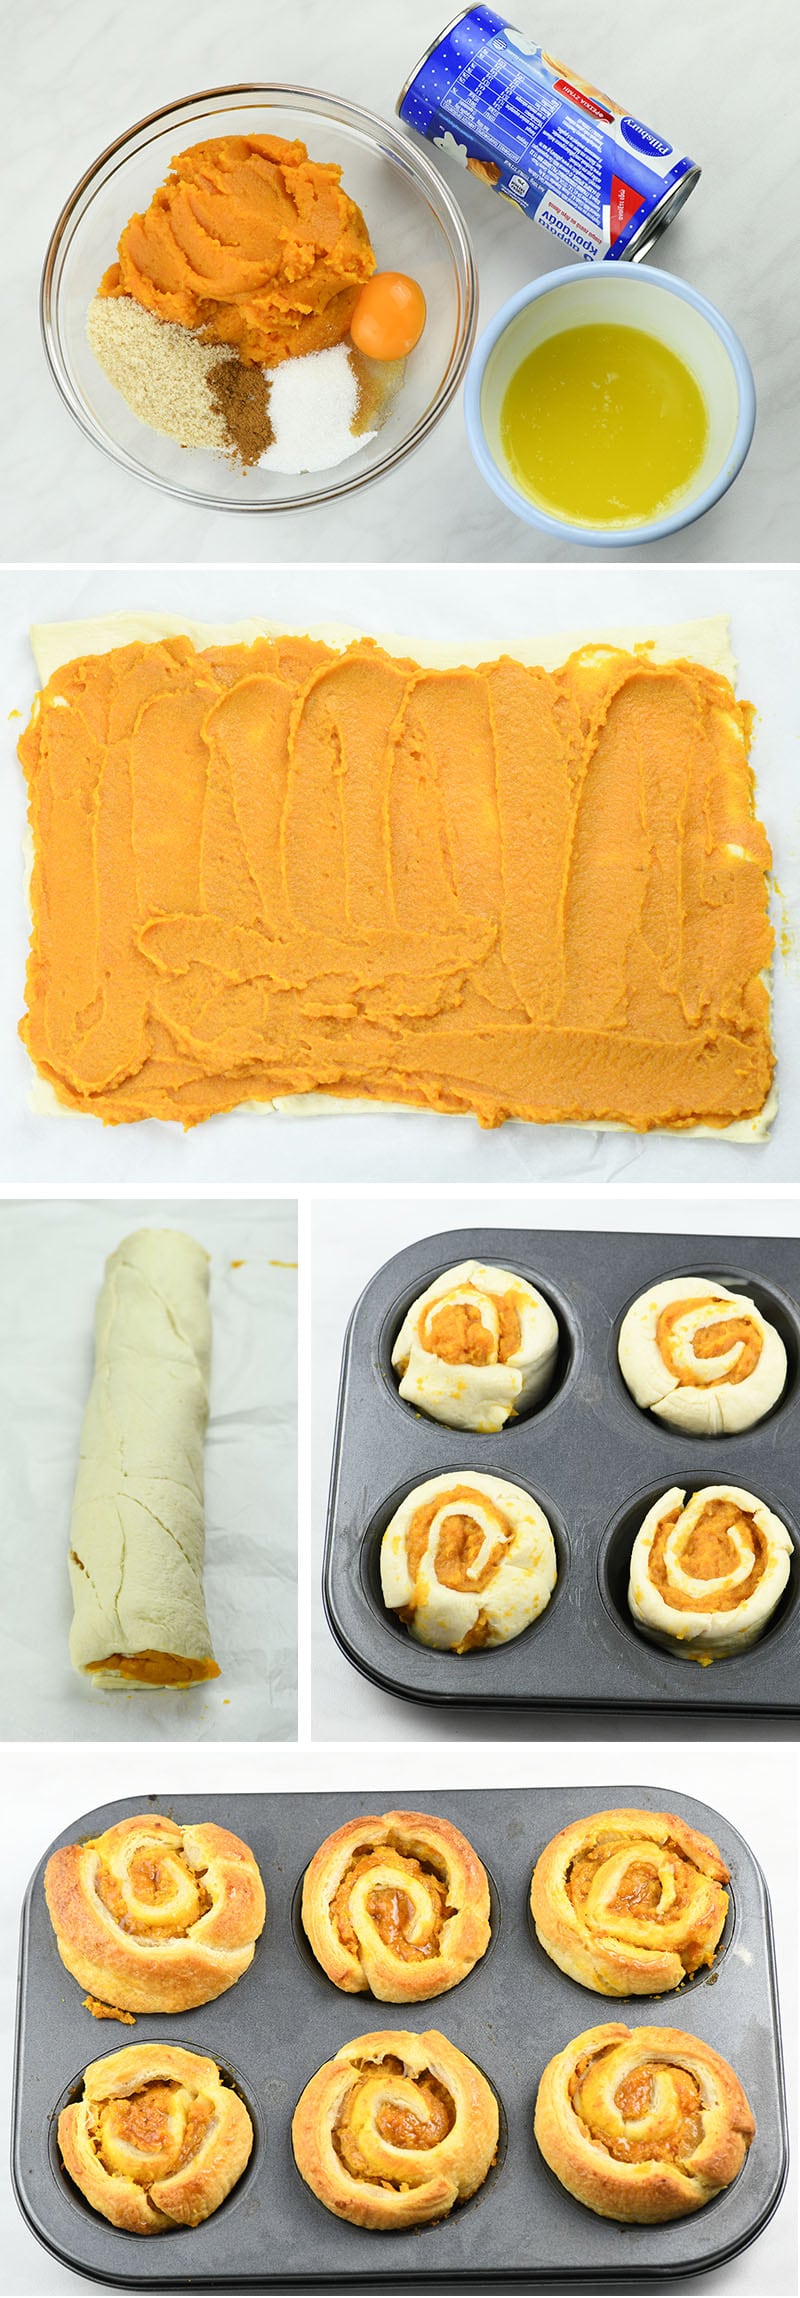 Couple of Pumpkin Roll Muffins preparation steps images.